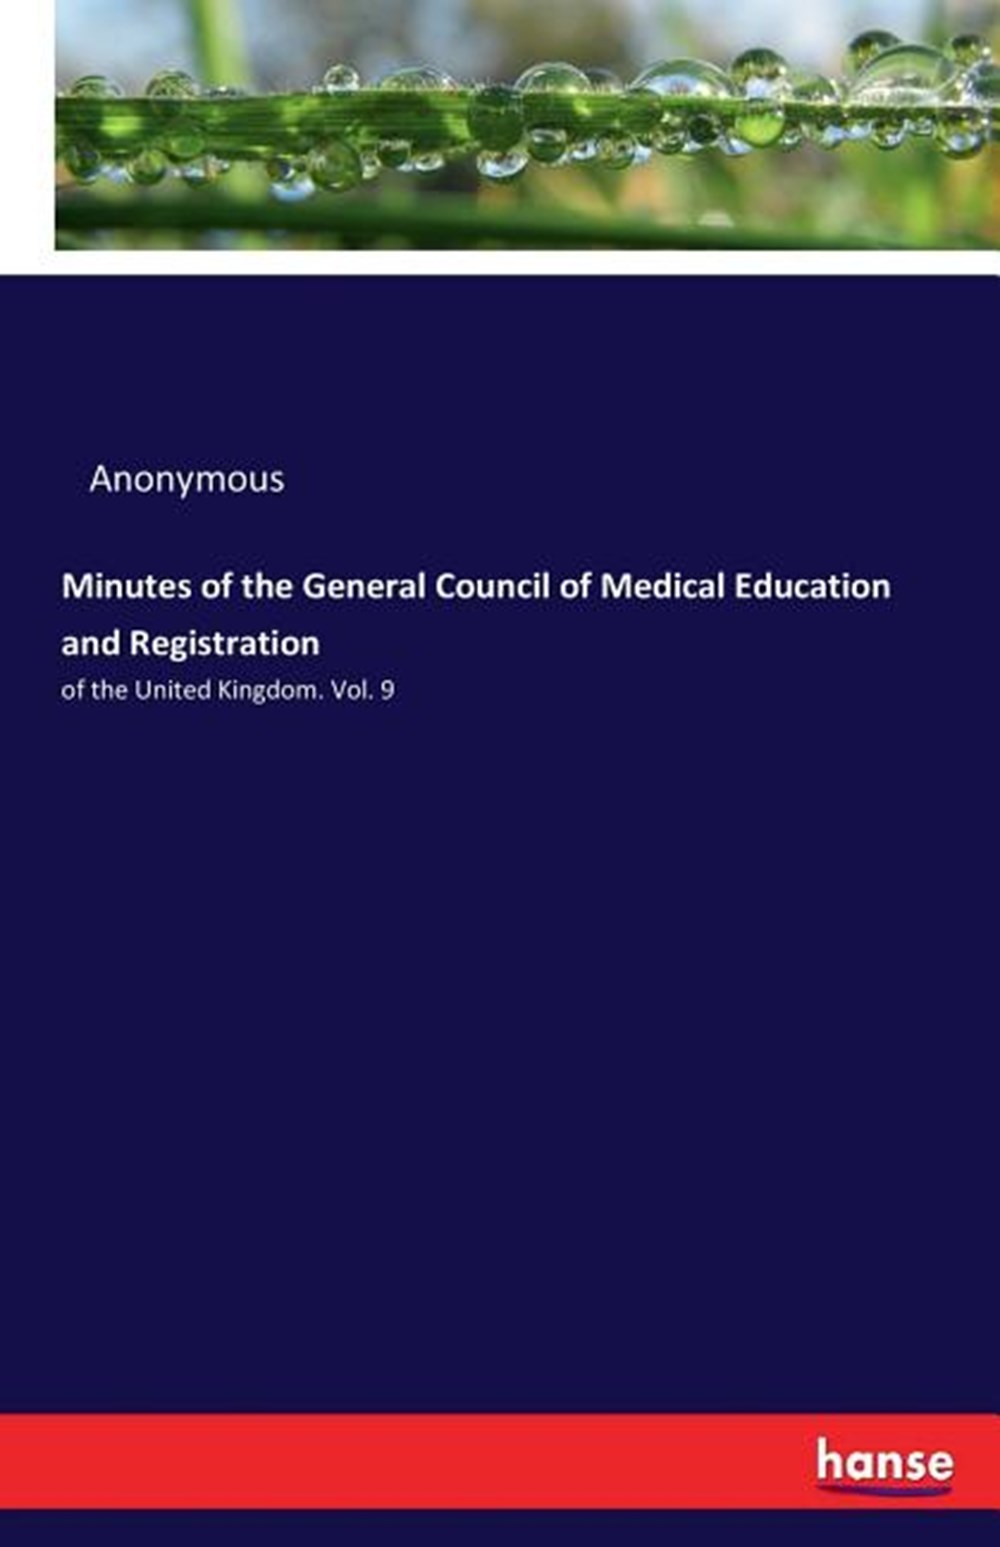 Minutes of the General Council of Medical Education and Registration of the United Kingdom. Vol. 9